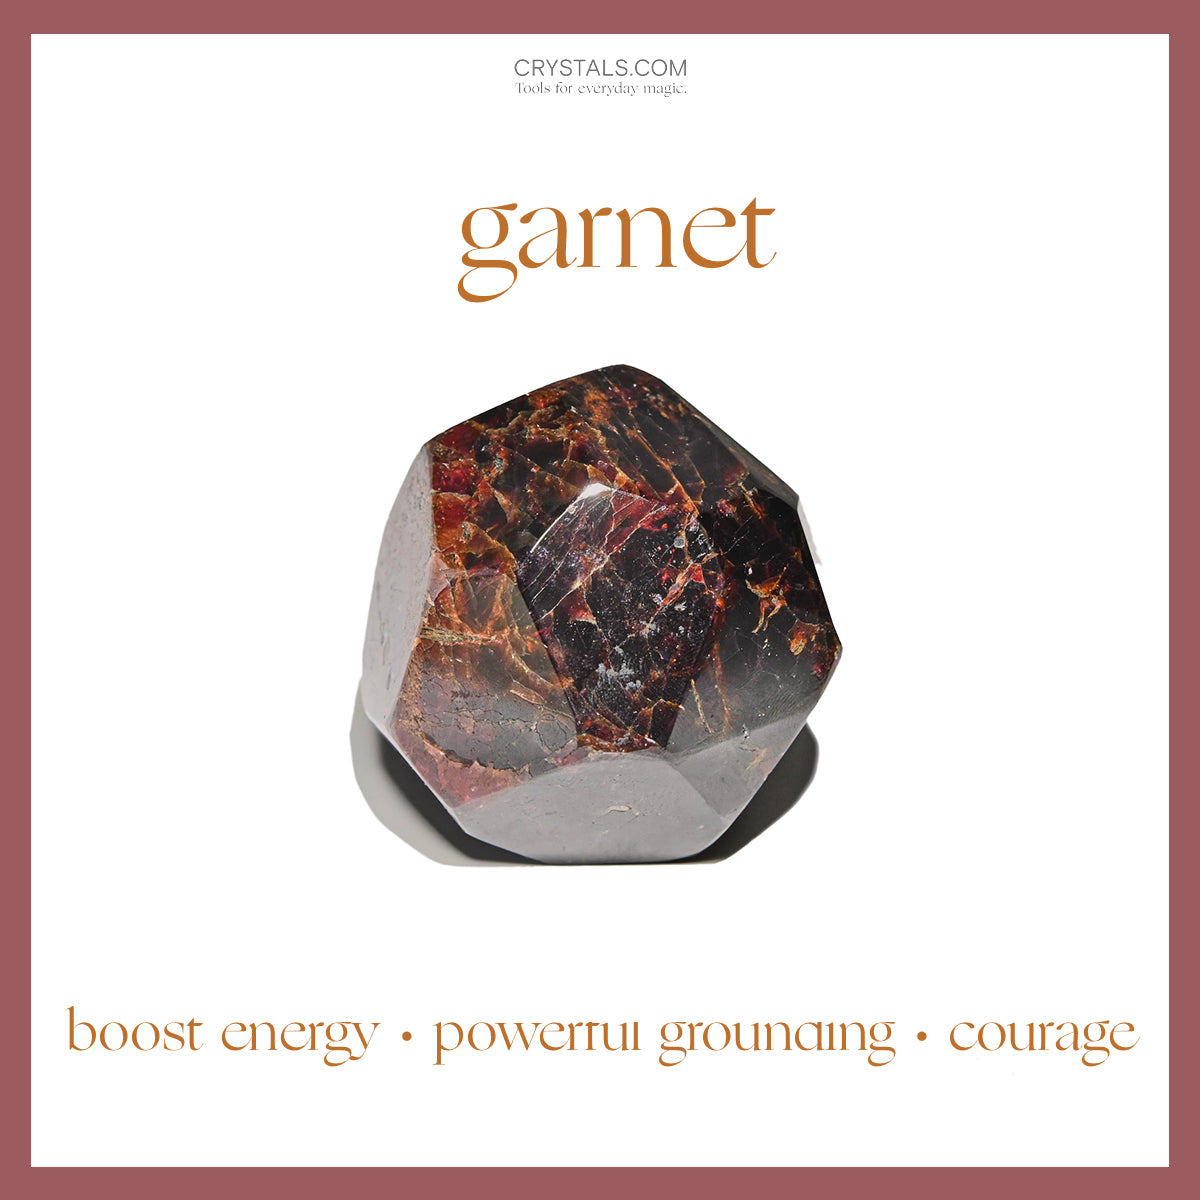 Garnet Crystal Meaning, and Benefits – CRYSTALS.COM